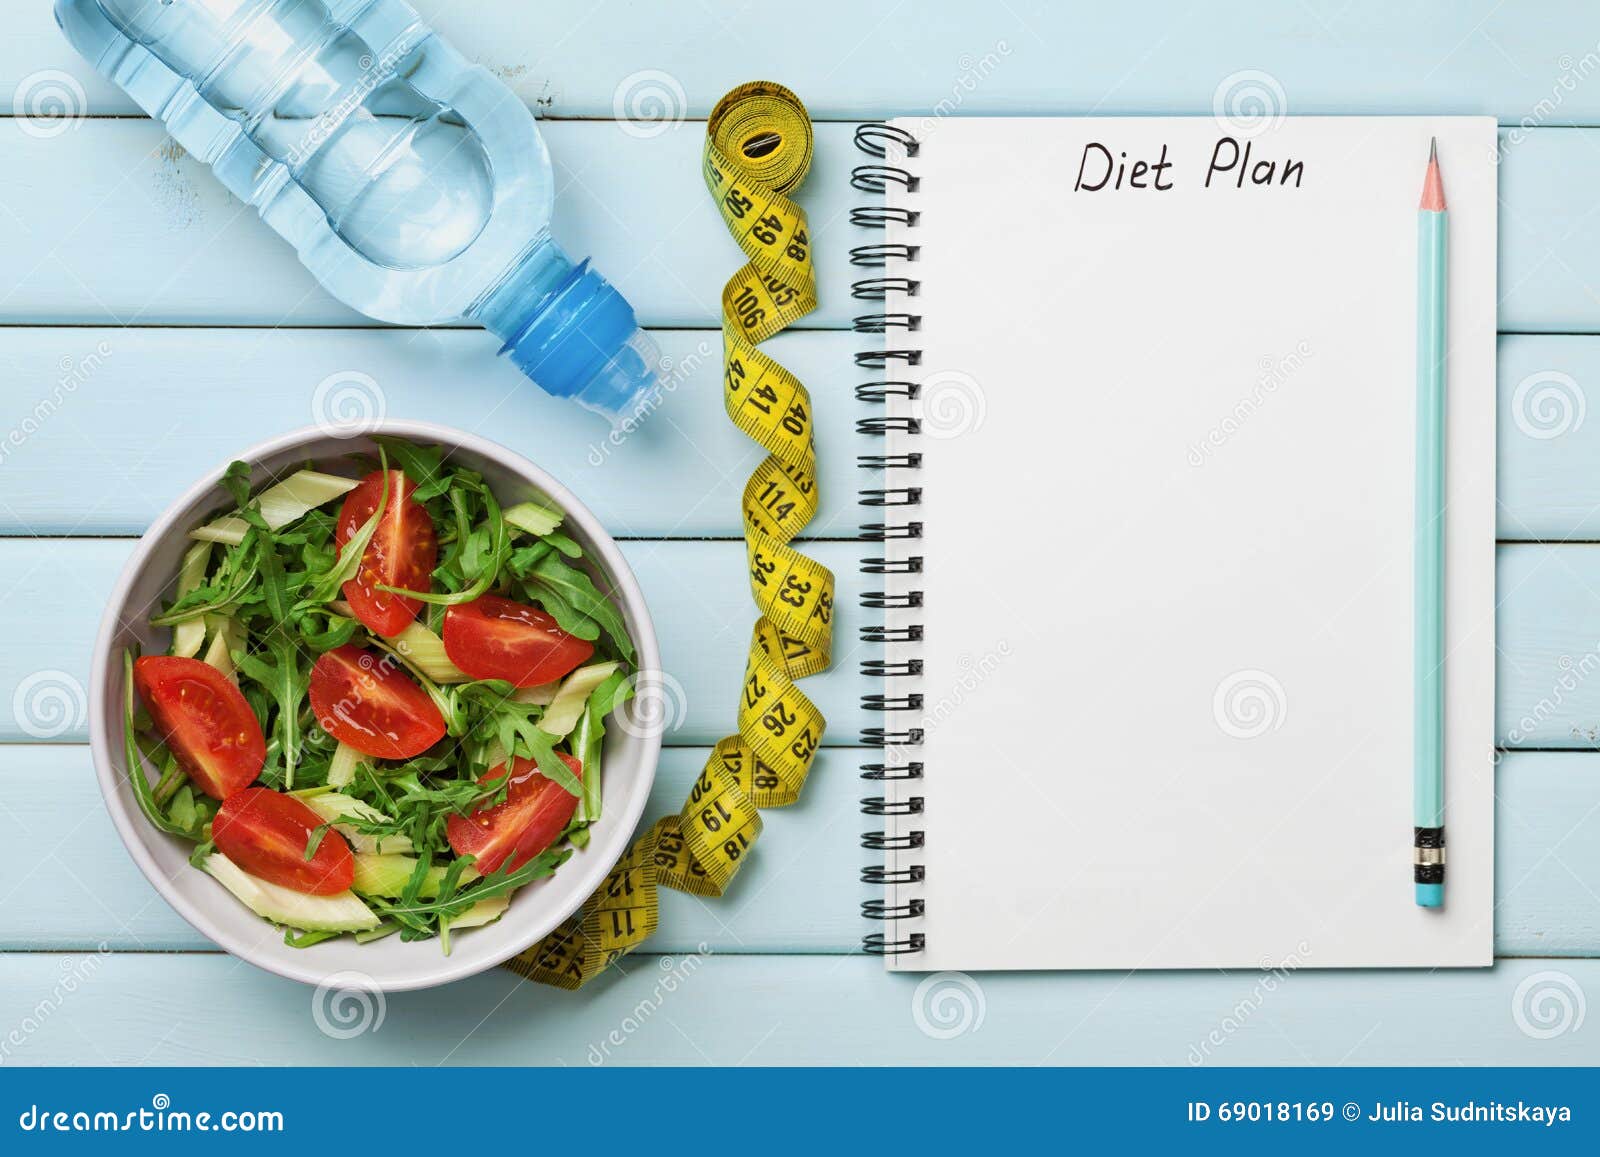 water diet for weight loss